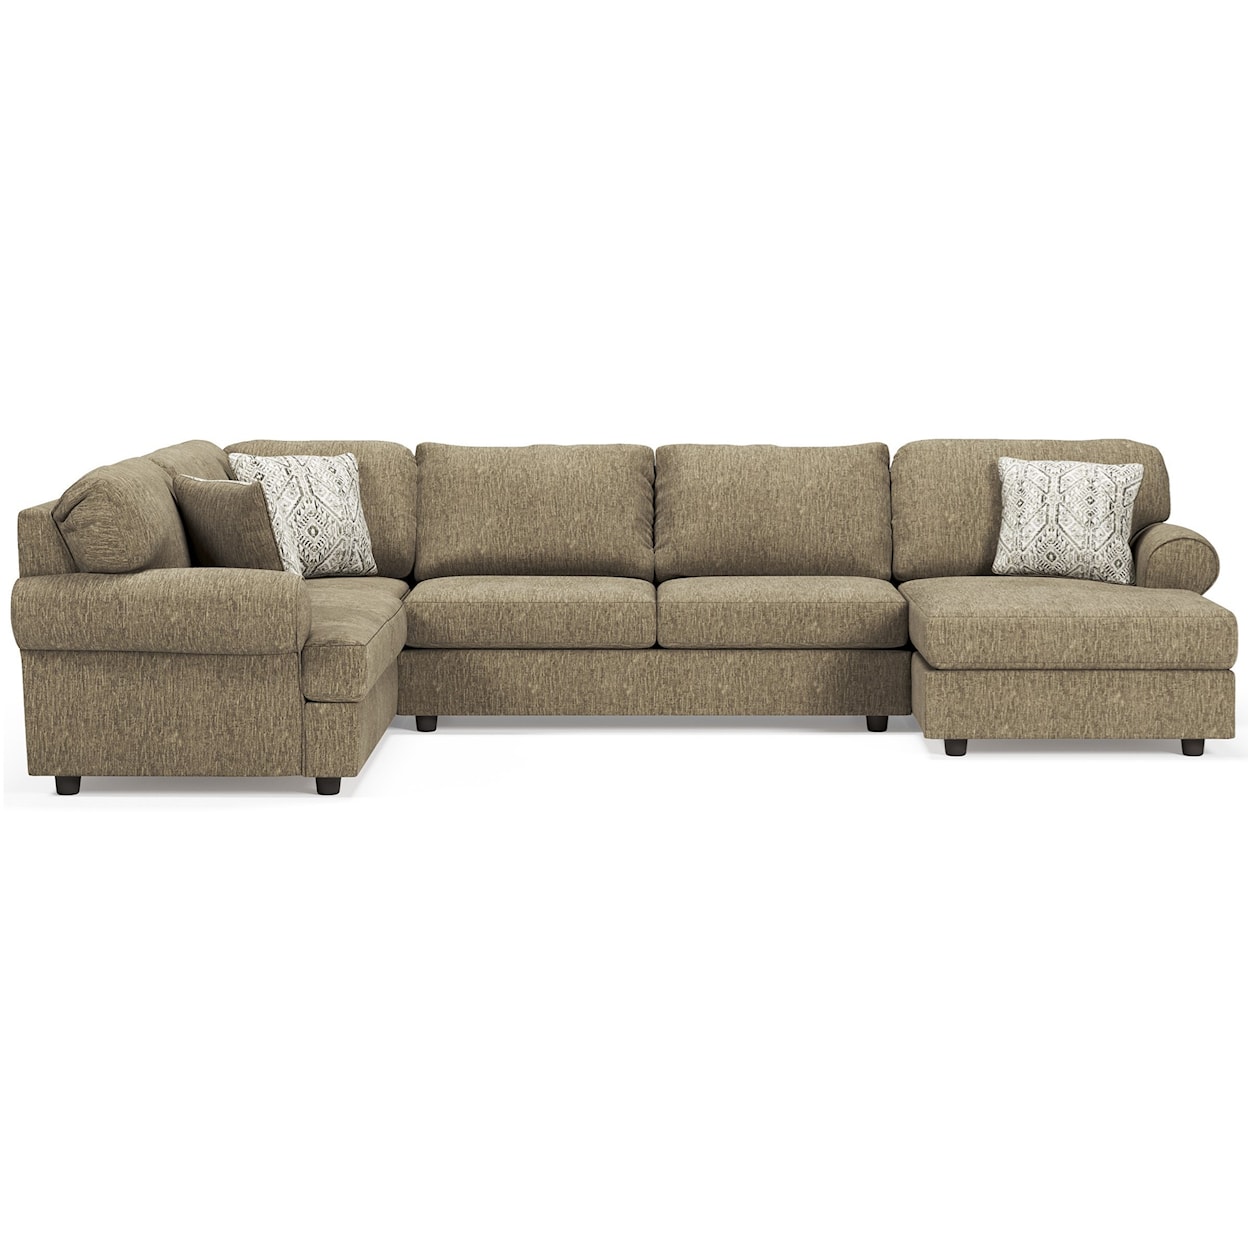 Signature Design by Ashley Furniture Hoylake 3-Piece Sectional with Chaise